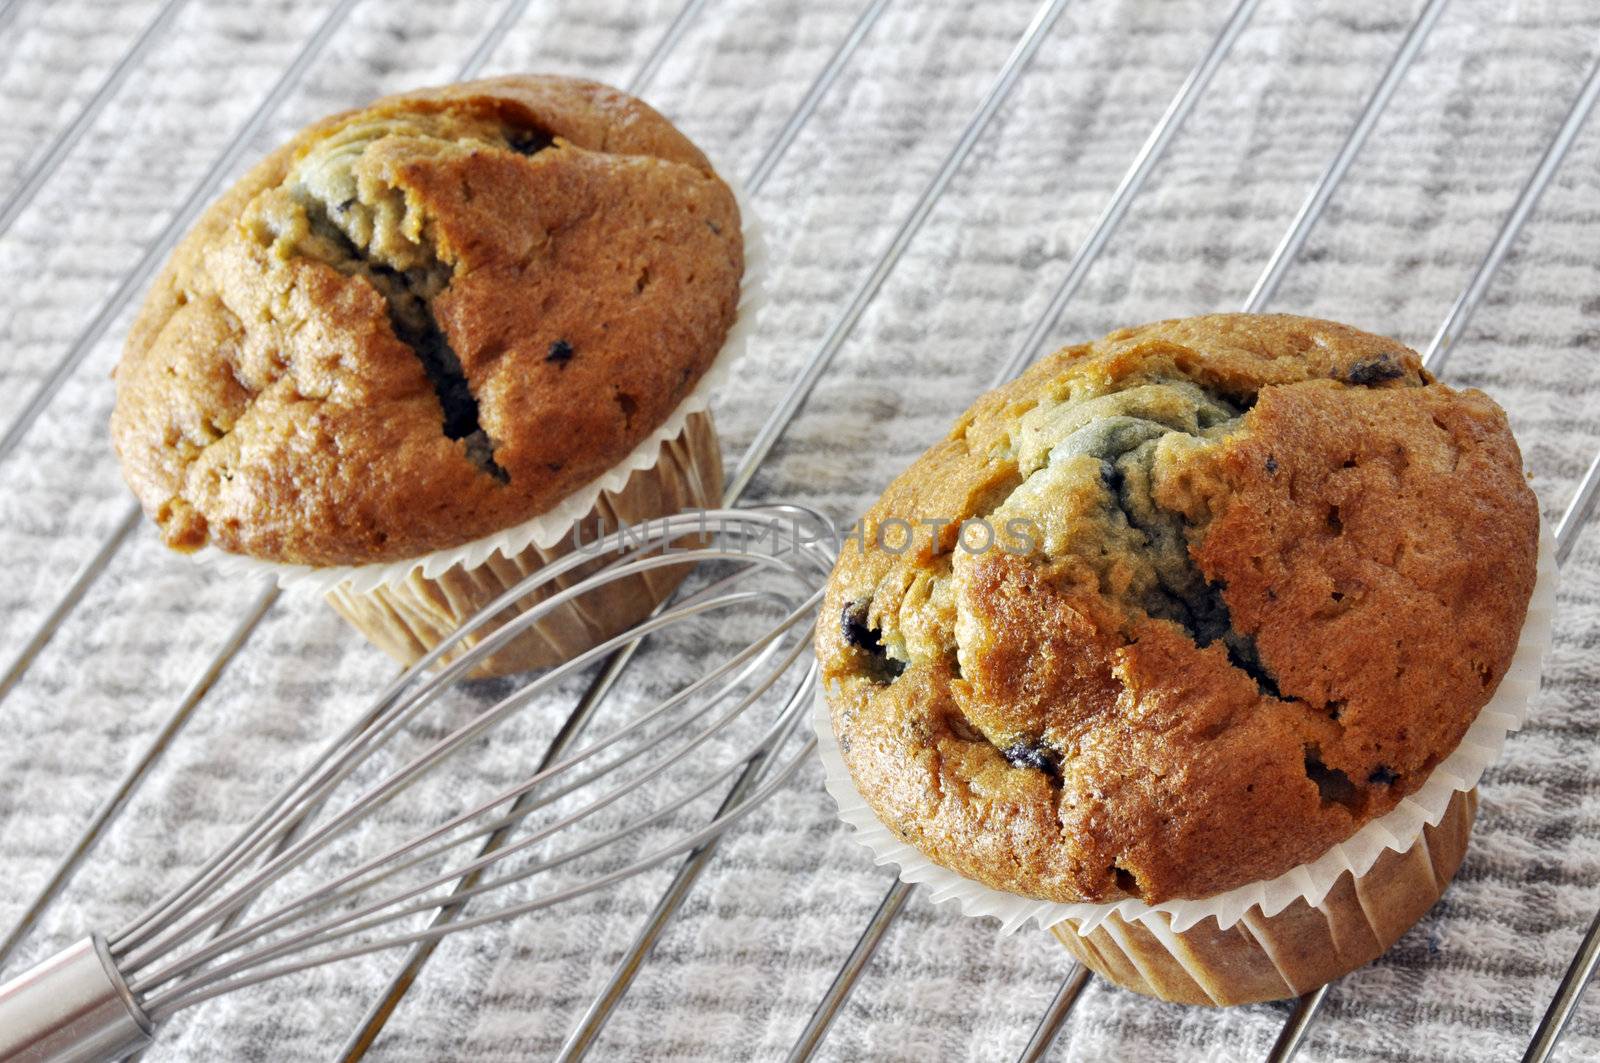 Two blueberry muffins by dutourdumonde